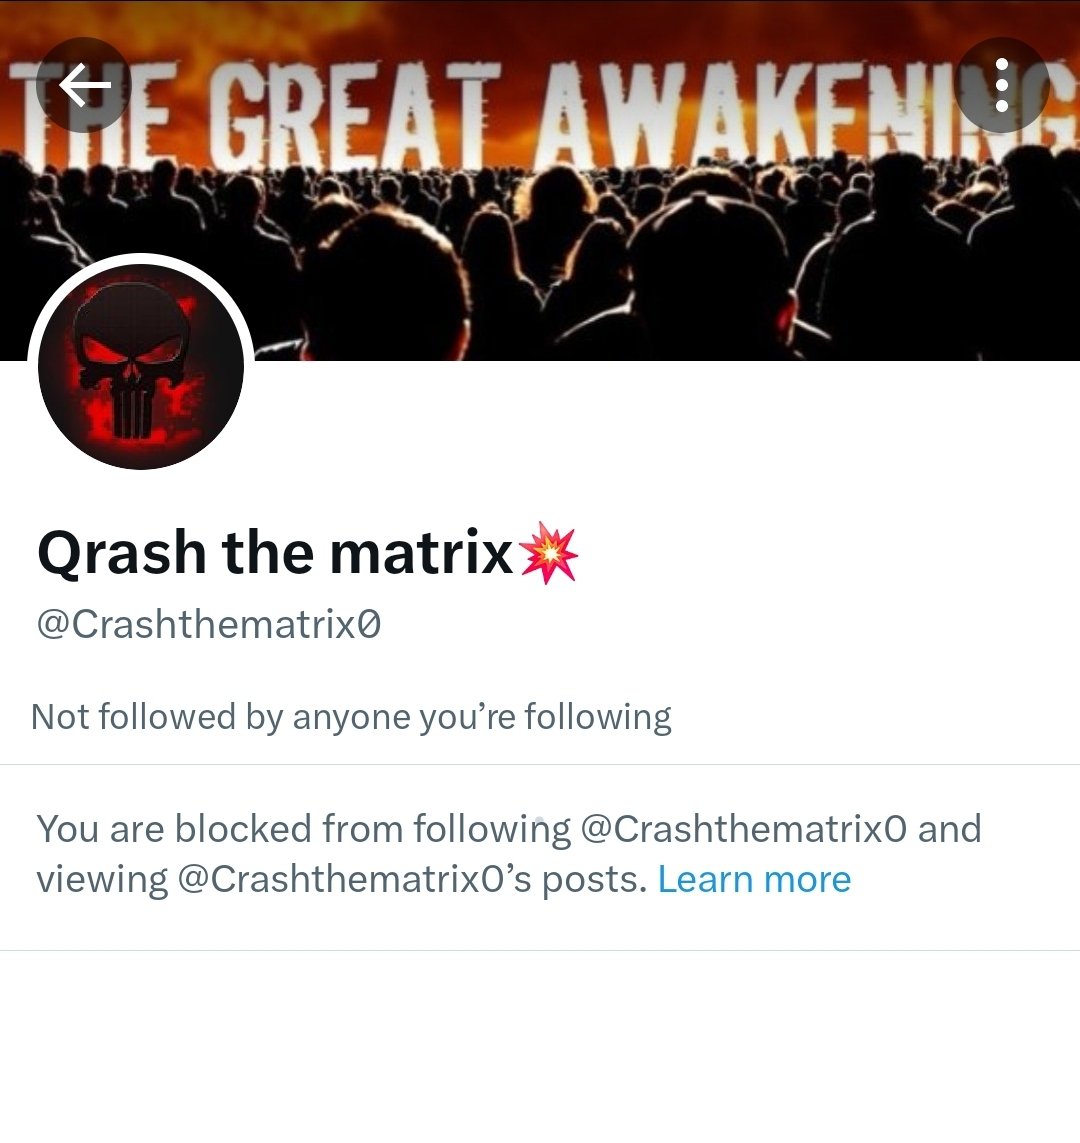 This account @Crashthematrix0 is a fake account and is a scammer and they are using my image pretending to be me. Please report this account! I'm blocked from it. And the telegram channel they show on this account is also a SCAM.